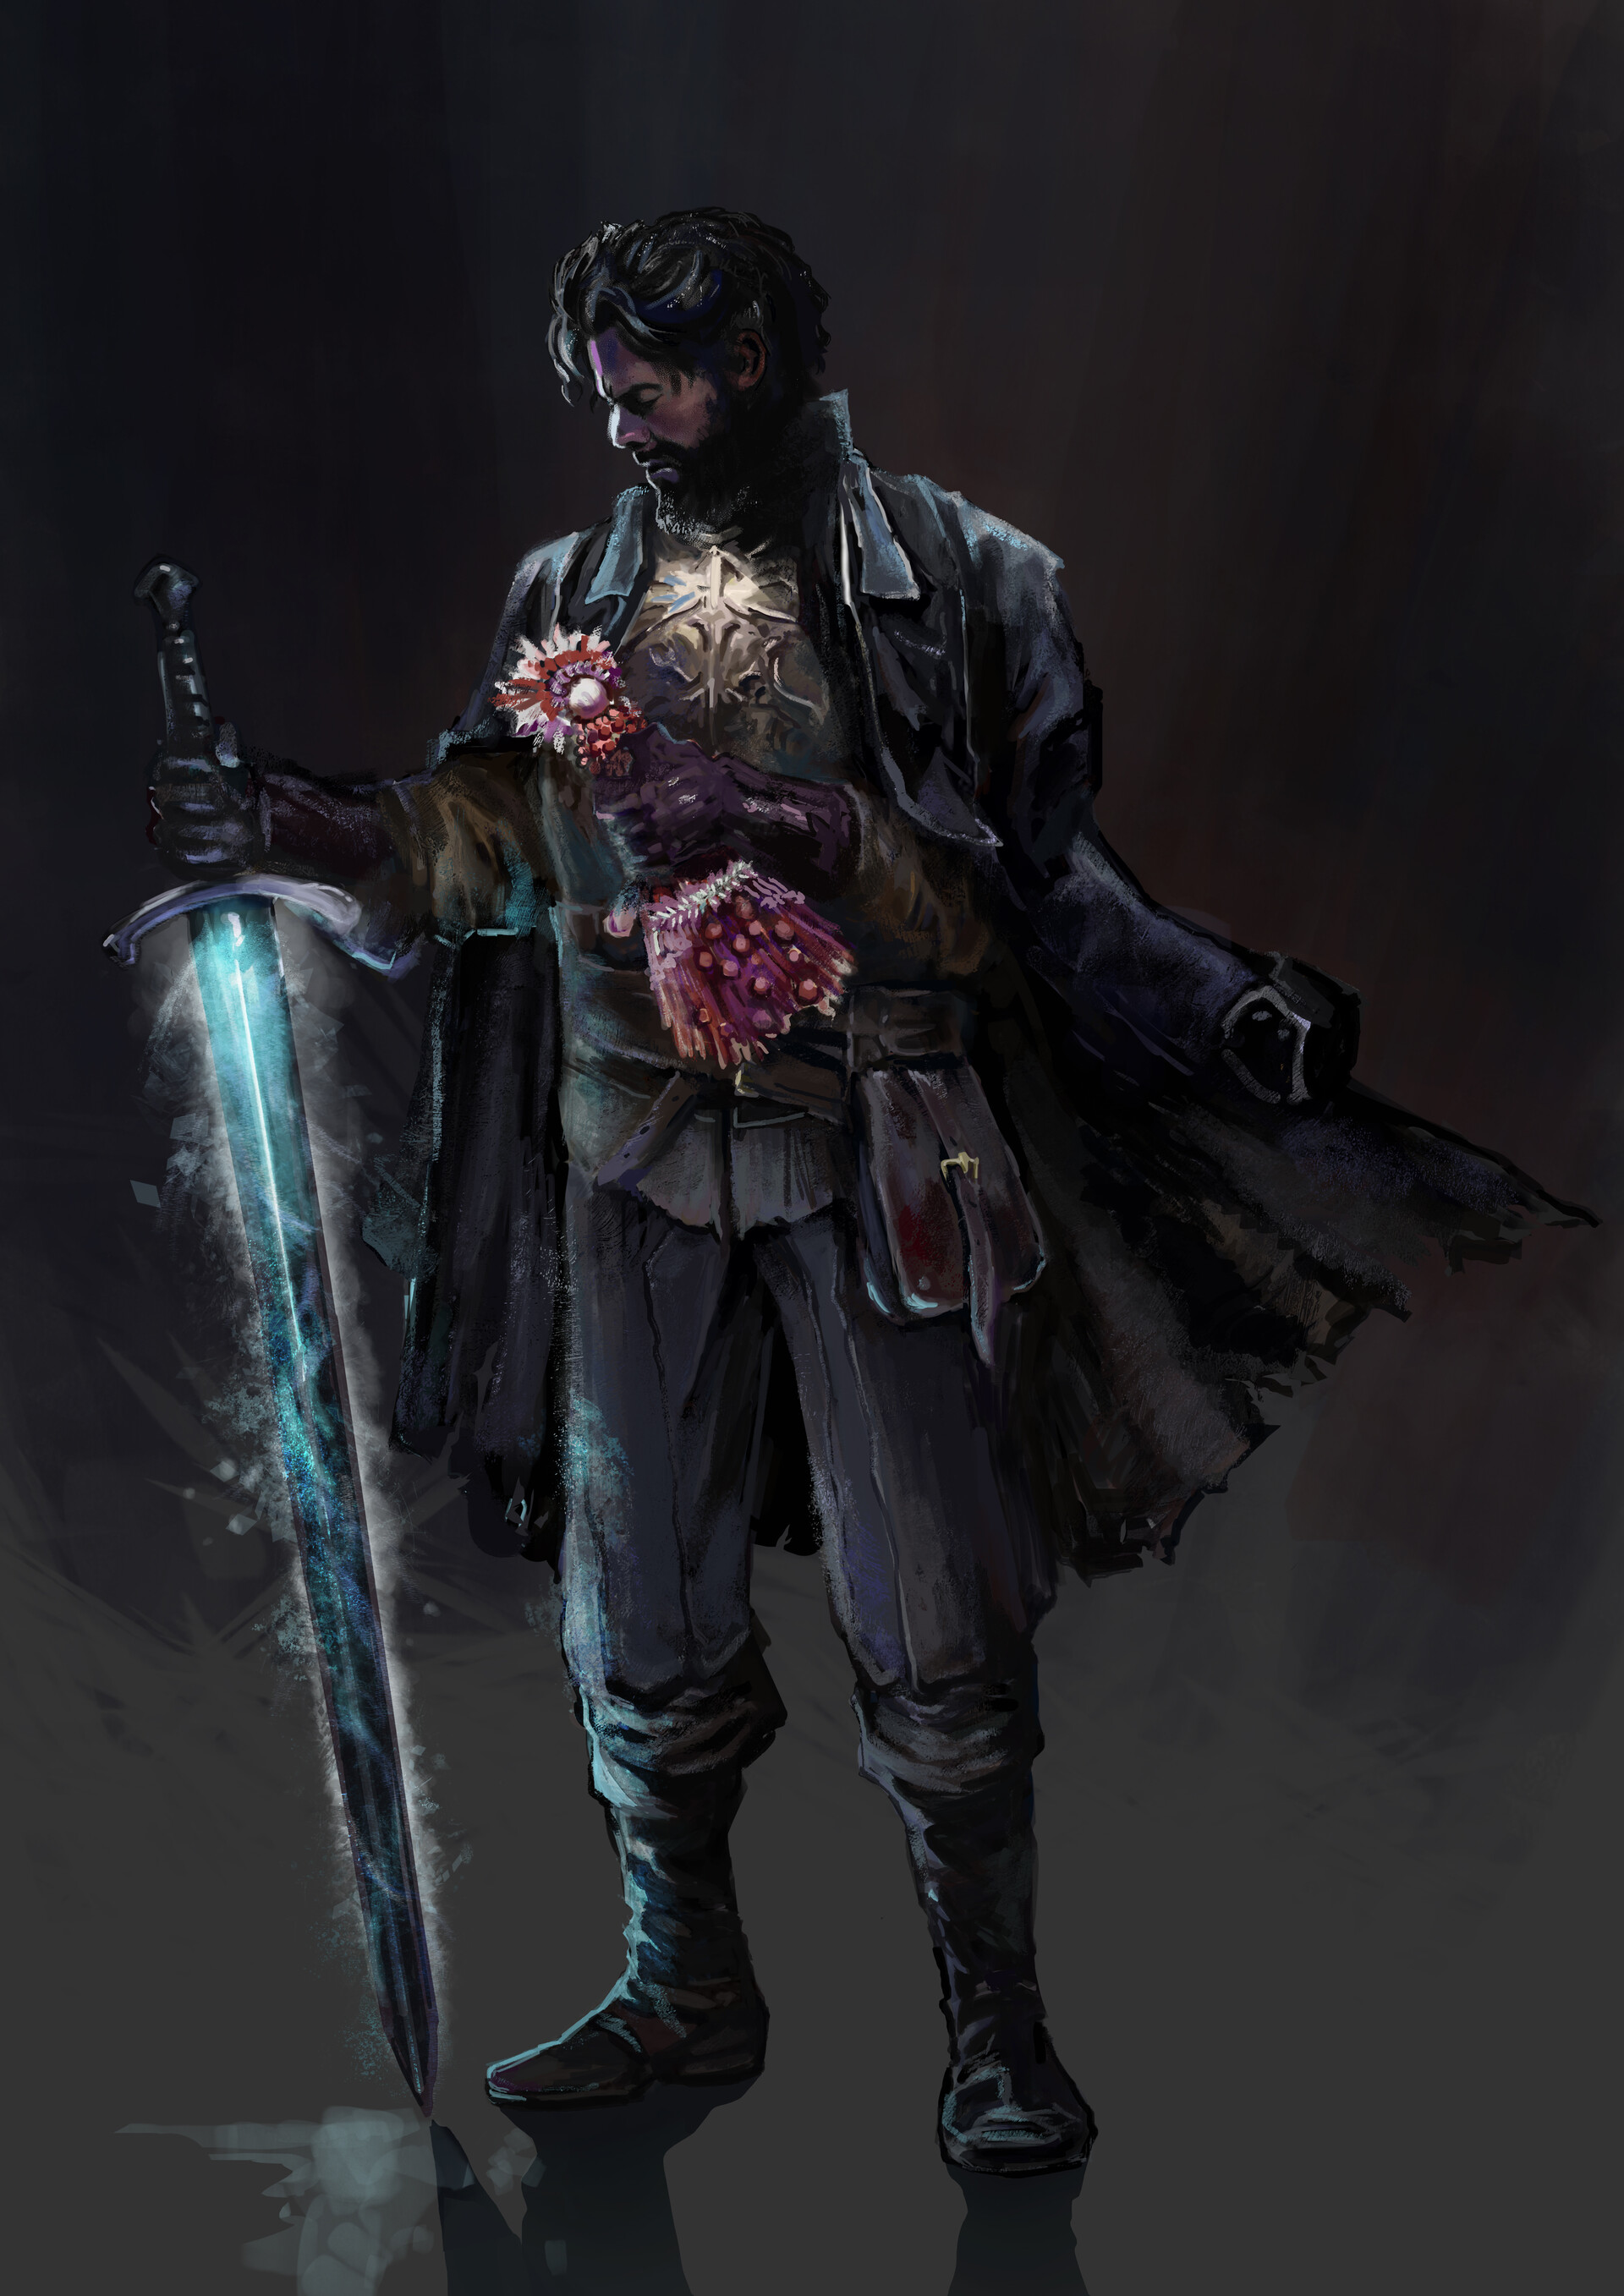 ArtStation - DnD character commission